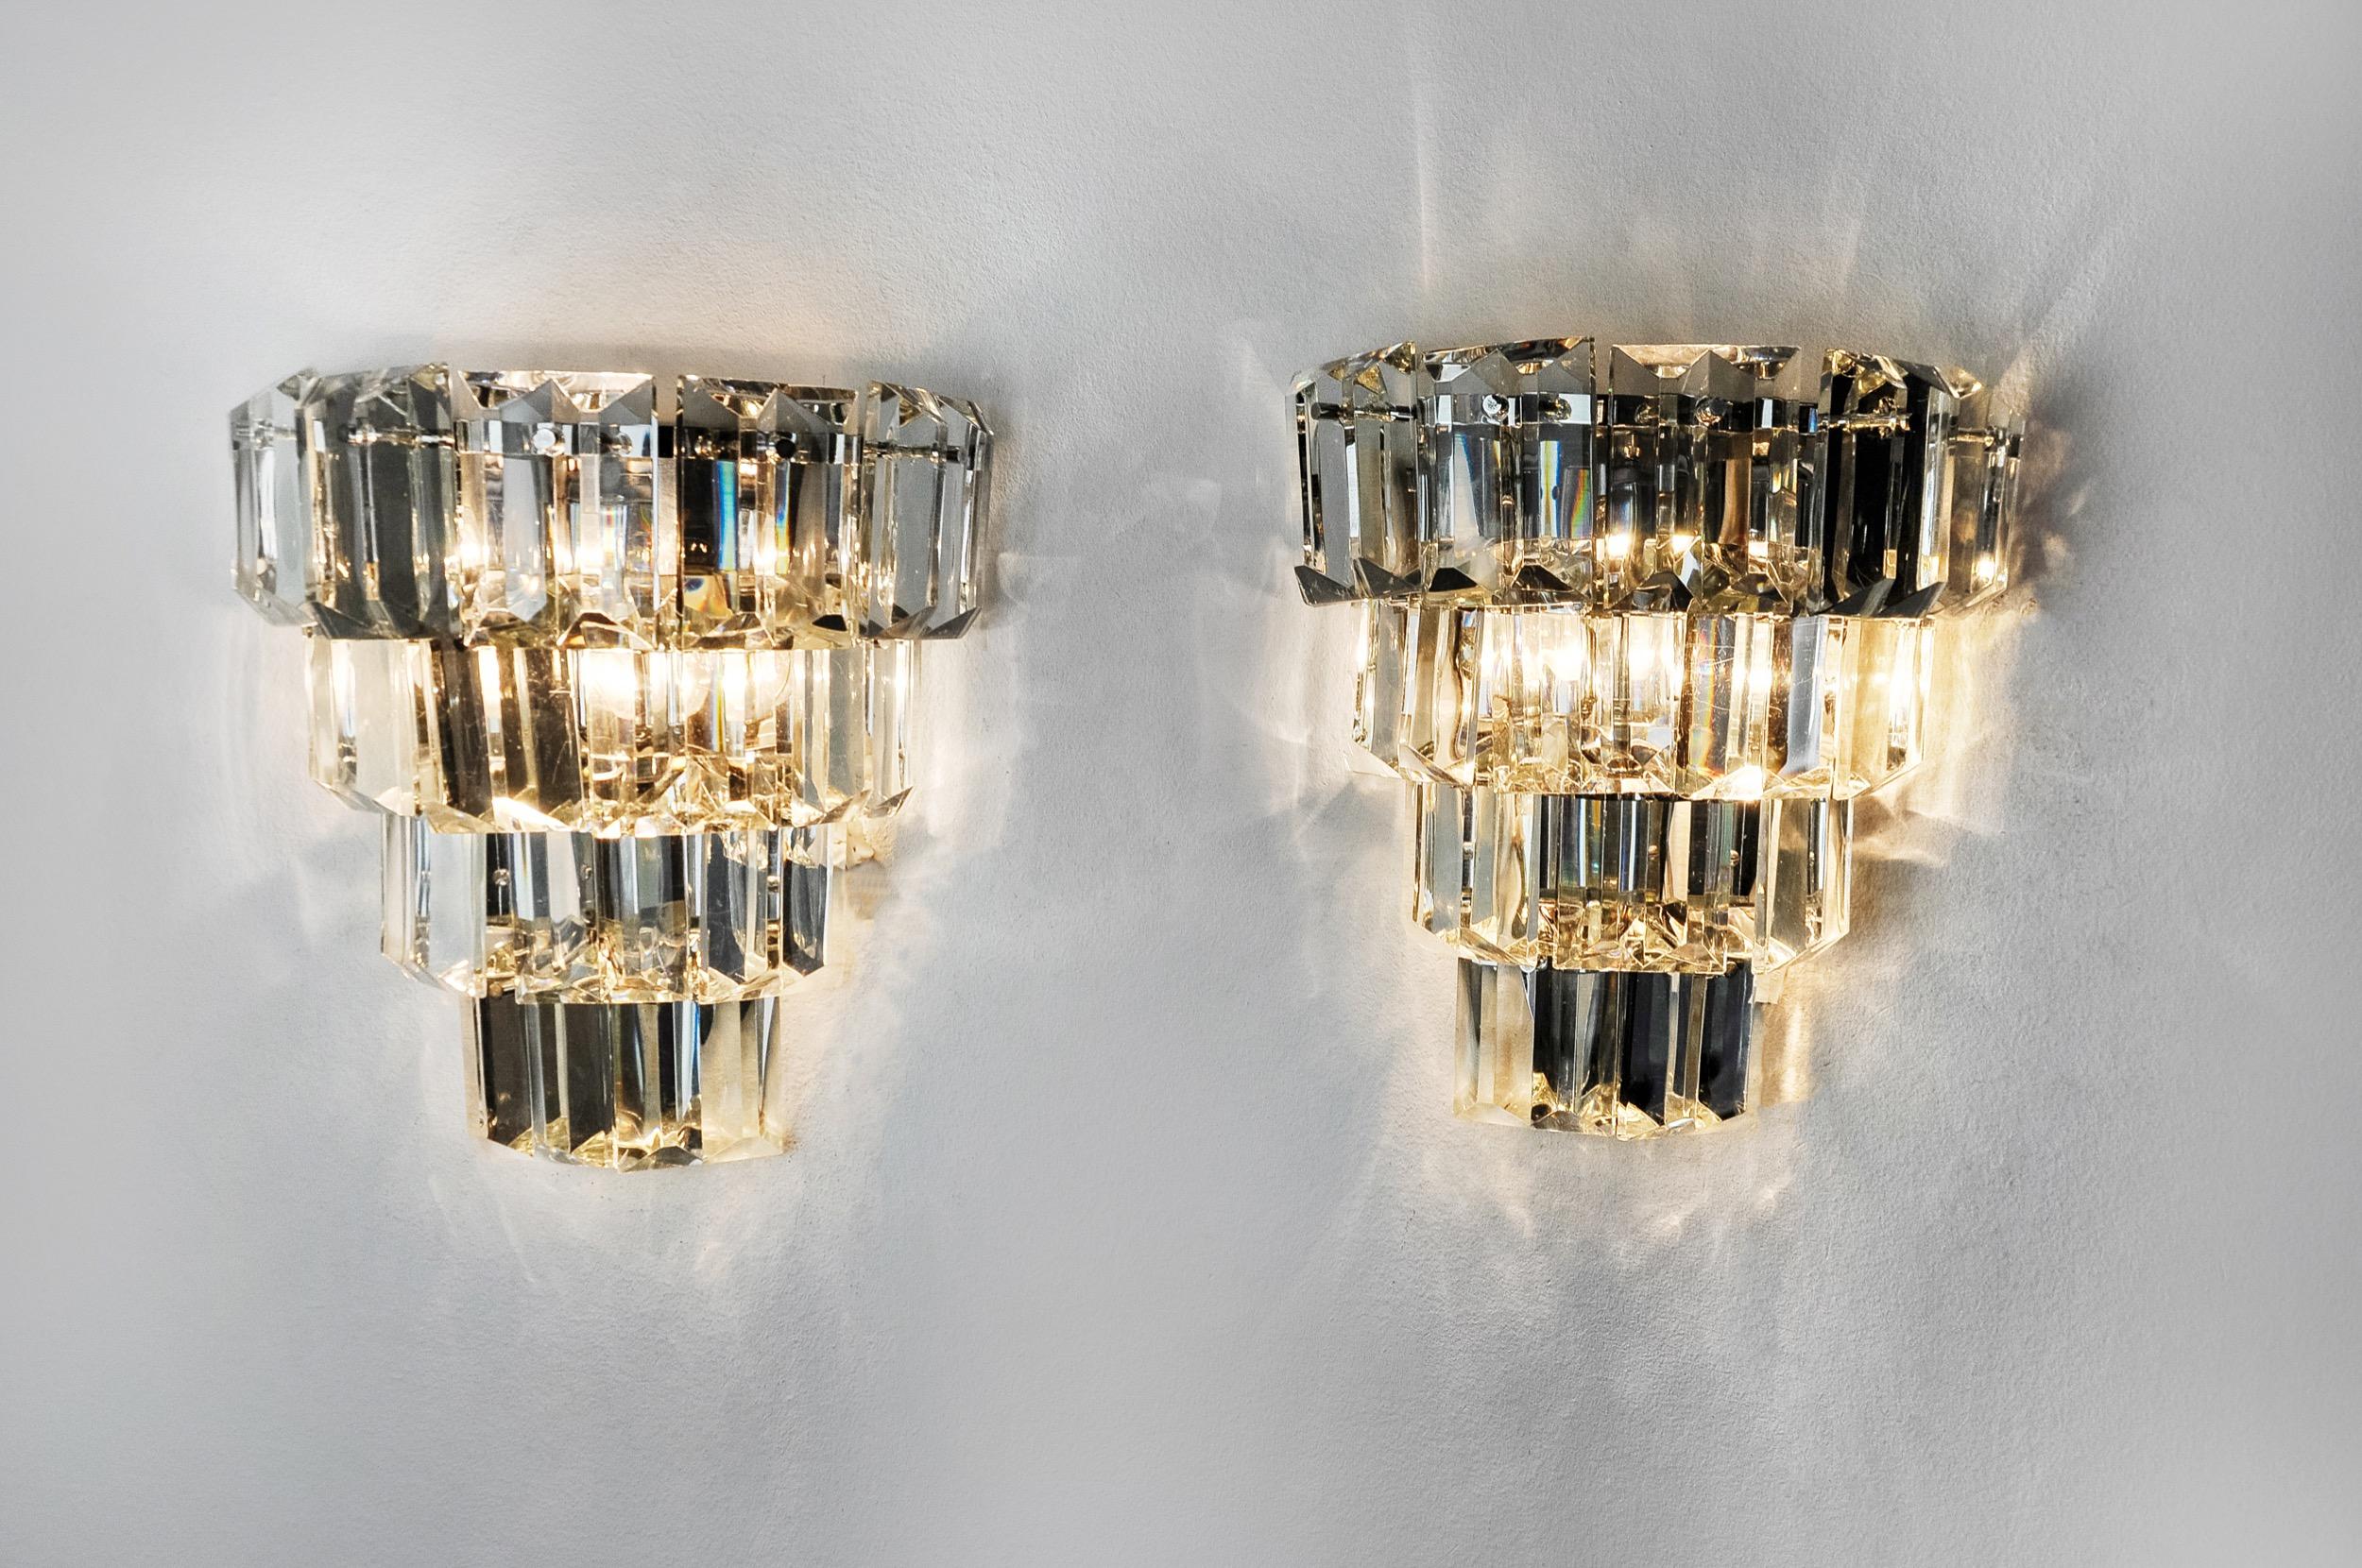 Very beautiful and large pair of Kinkeldey wall lights designed and produced in Germany in the 1970s. Cut crystals distributed over 4 levels of a chrome metal structure. Rare design object that will illuminate your interior wonderfully. Electricity